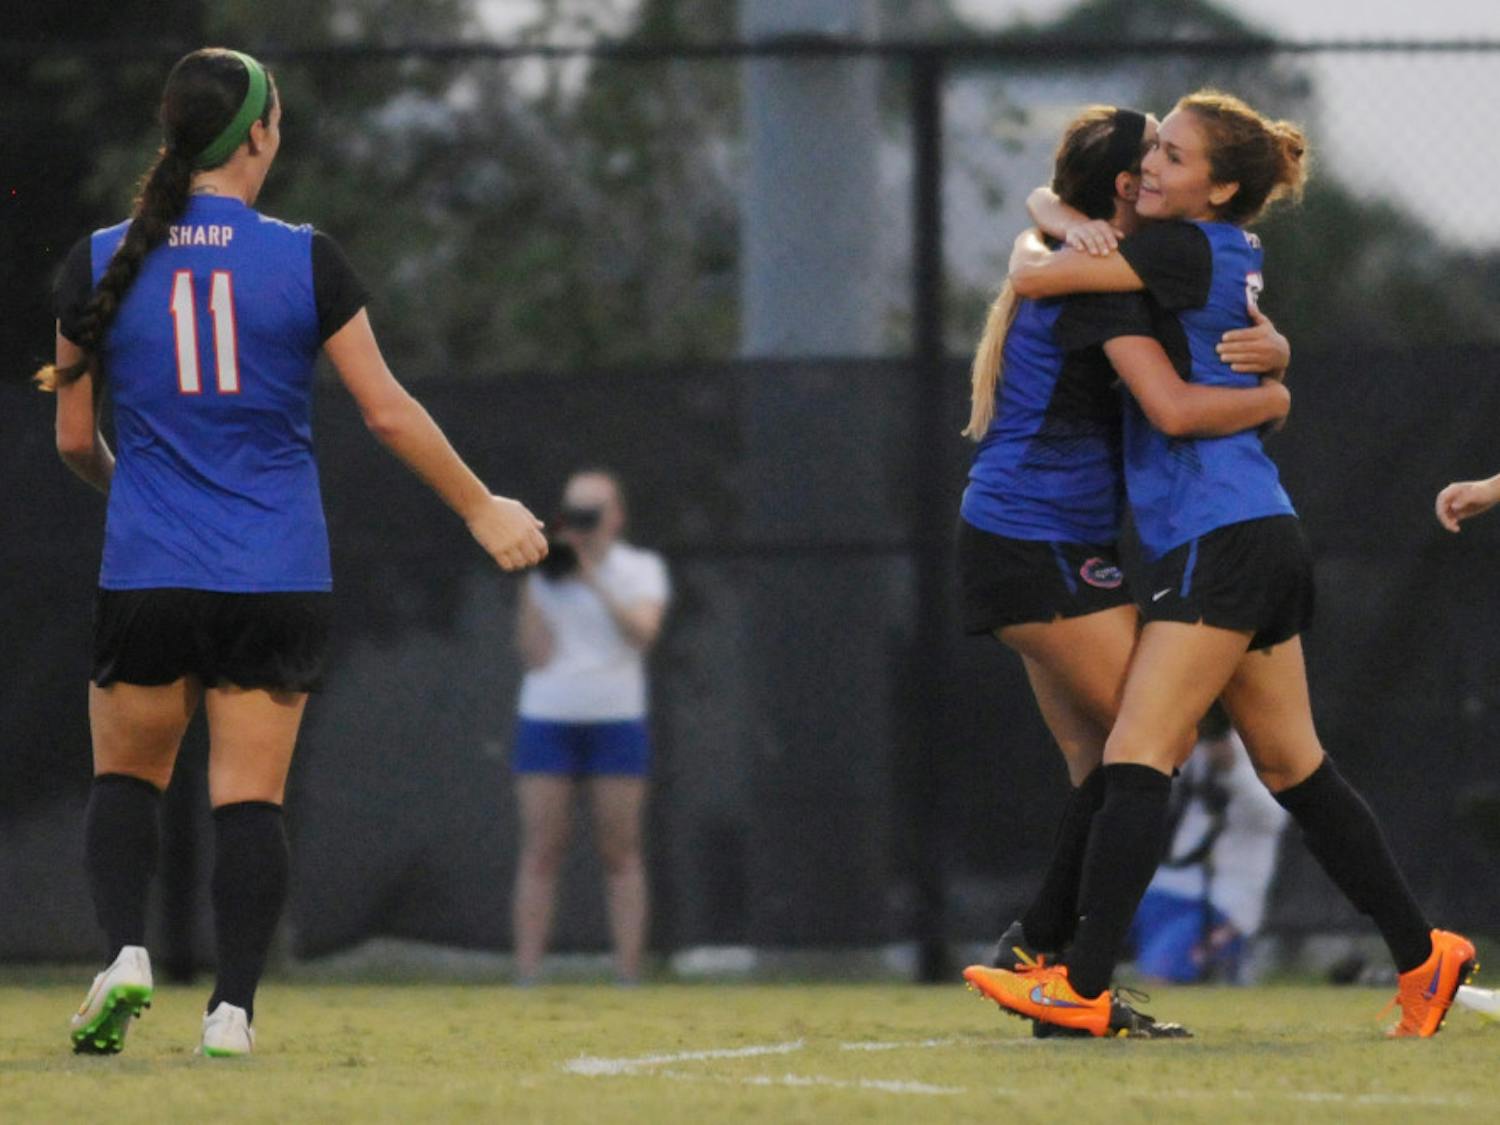 UF midfielder Mayra Pelayo hugs teammate Kristen Cardano after Pelayo scored the equalizer during Florida's 2-1 win against Troy in an exhibition match on Aug. 11, 2015, at the soccer practice field at Donald R. Dizney Stadium.